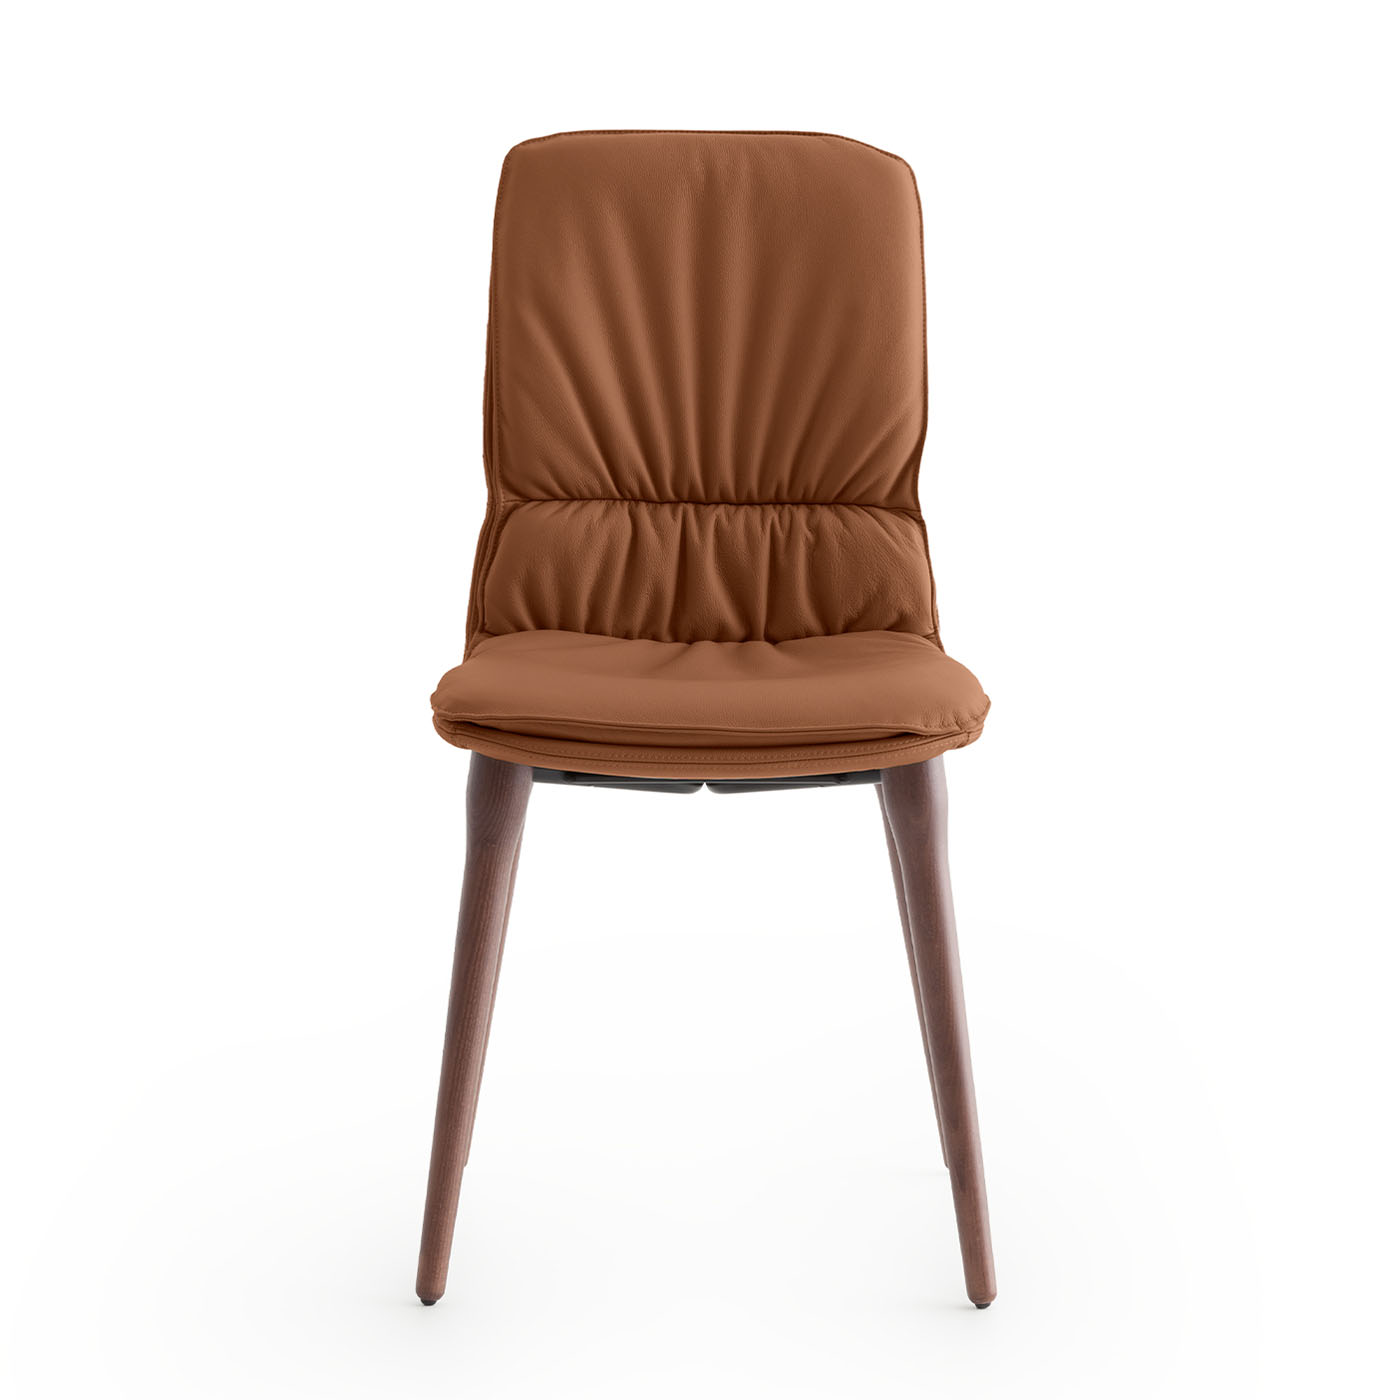 Coco Cognac-Toned Leather Chair - Alternative view 1